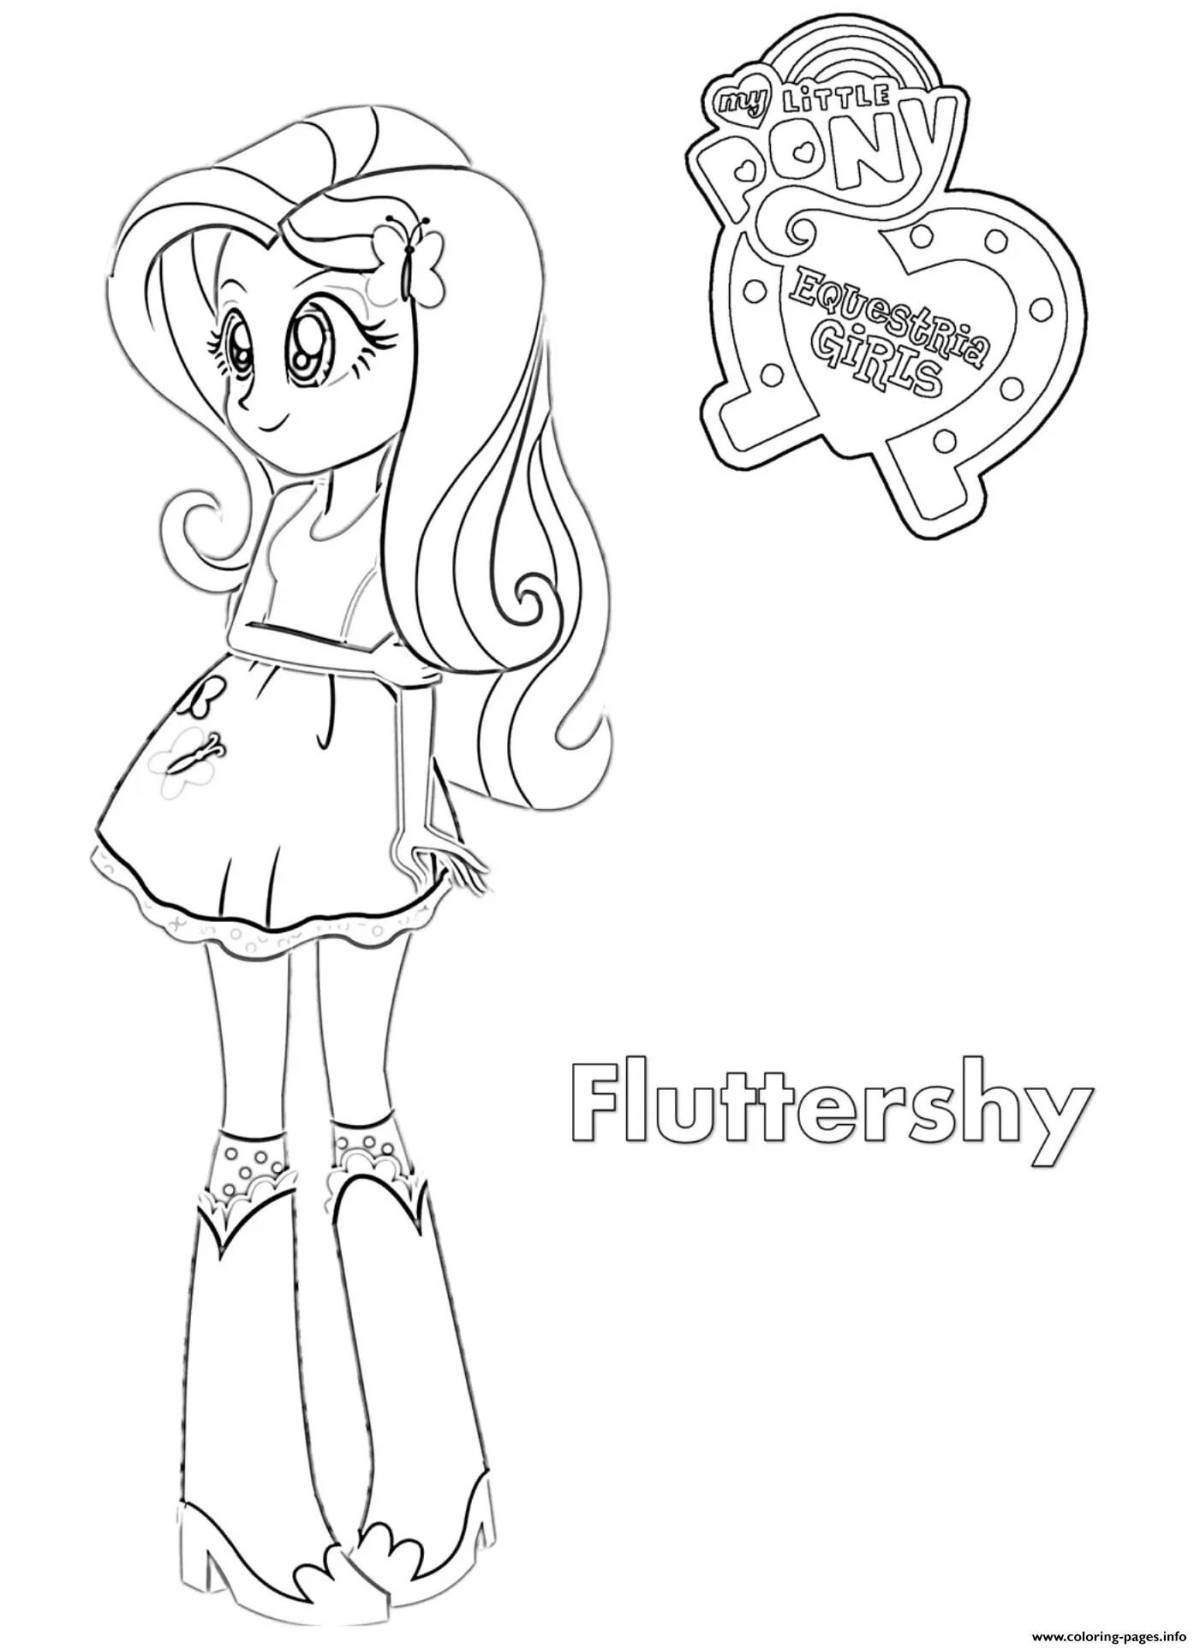 Radiant coloring page fluttershy man